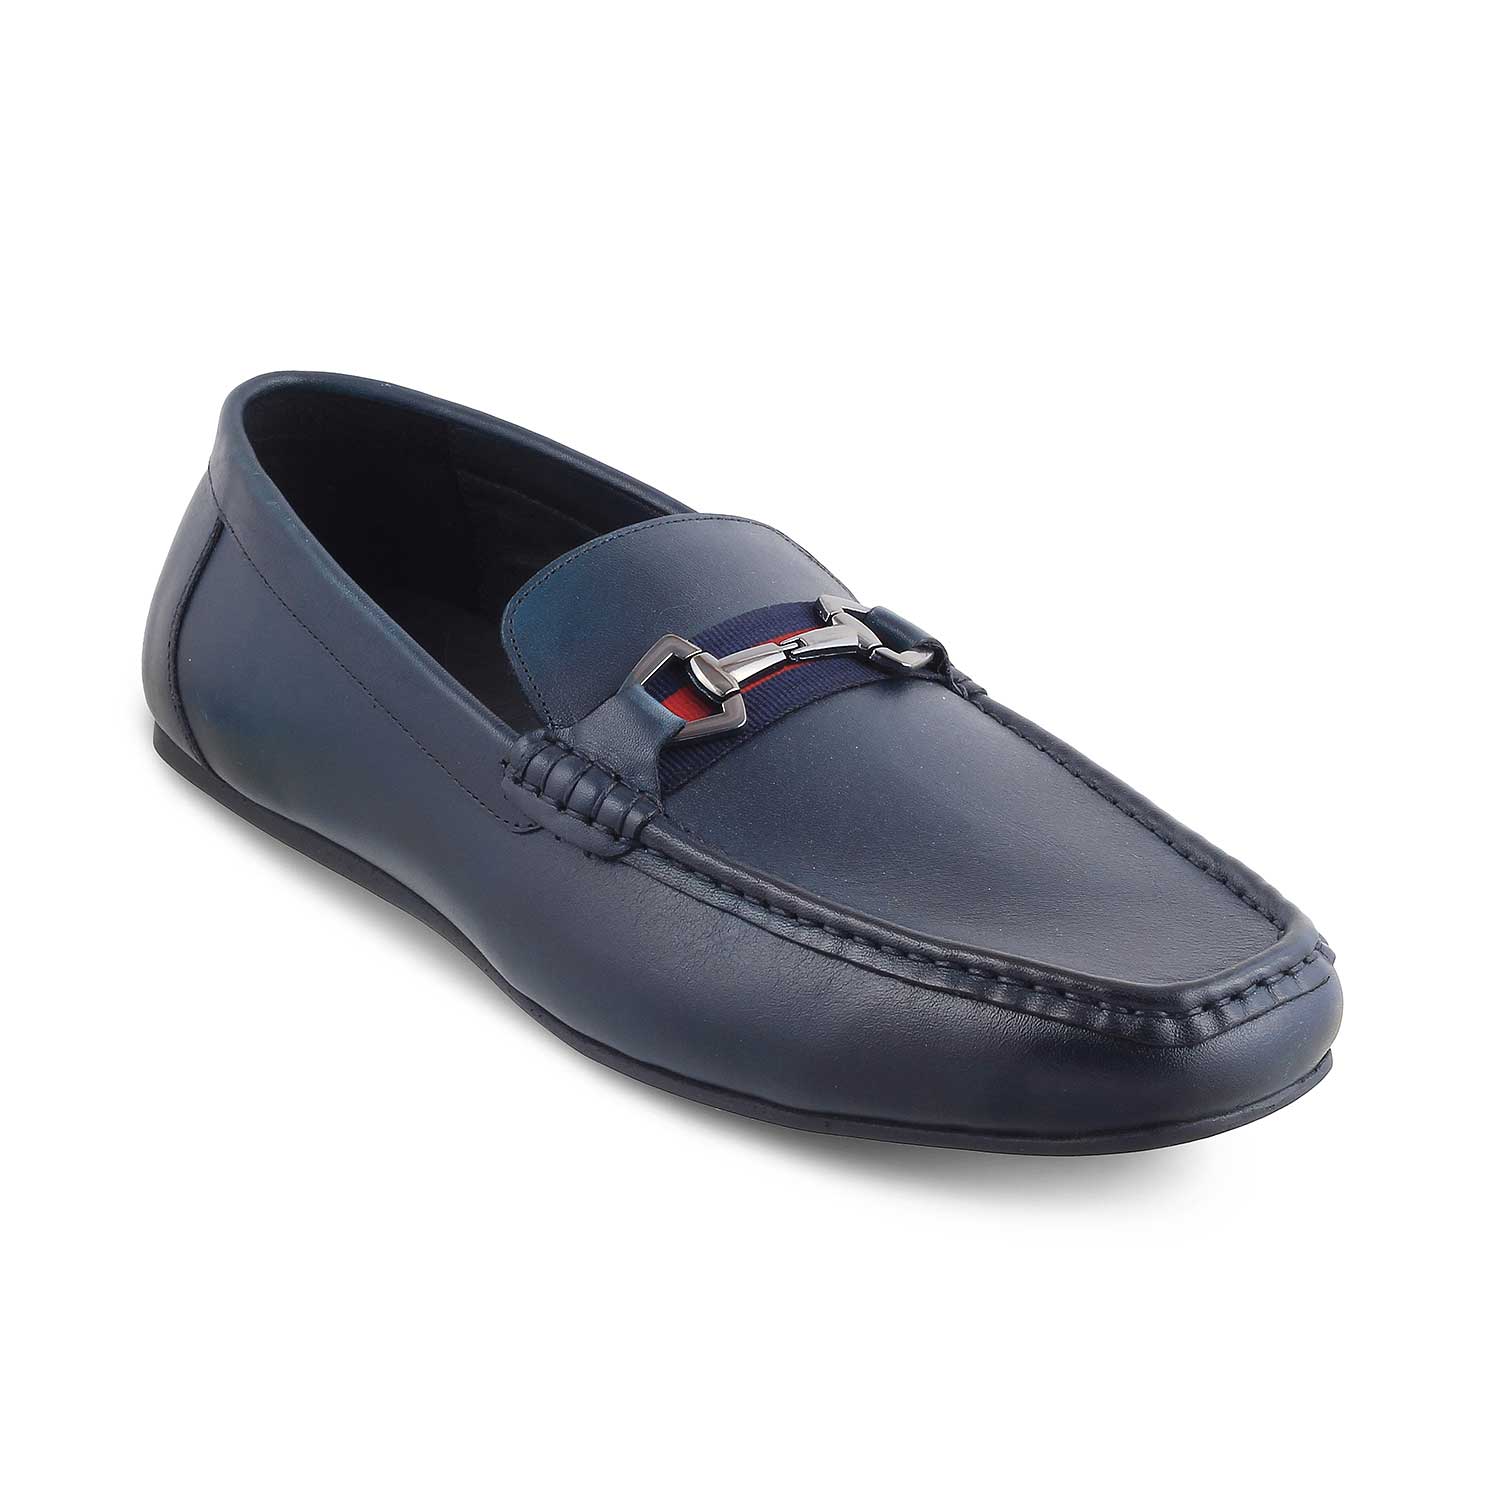 Tresmode-The Ondrive Blue Men's Leather Driving Loafers Tresmode-Tresmode